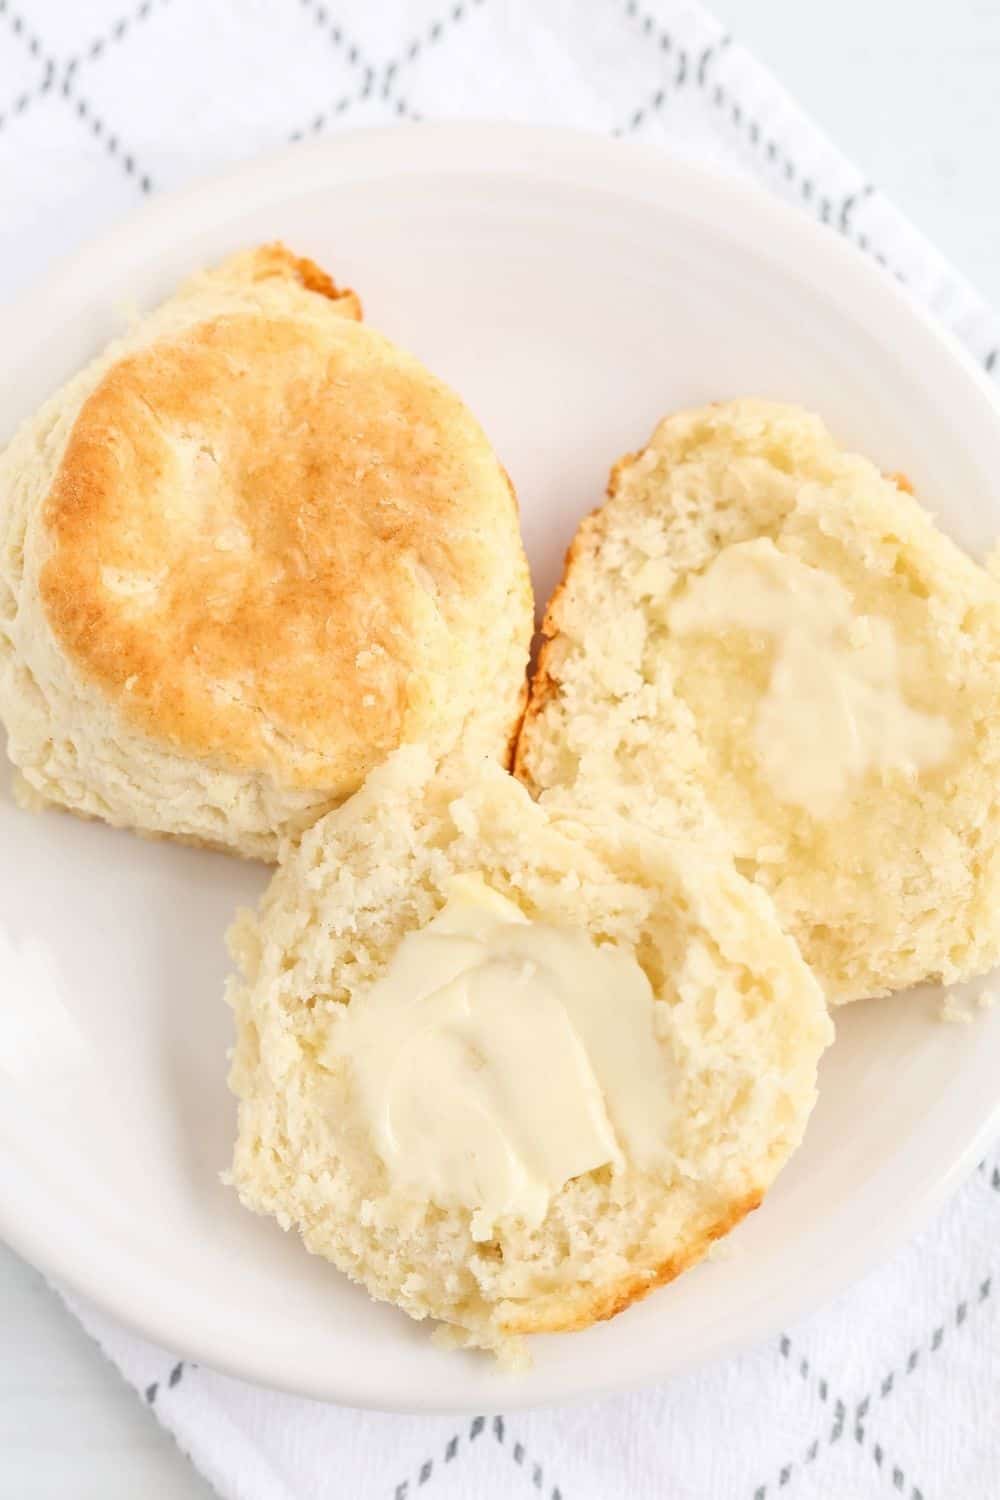 two bisquick biscuits on a white plate. One is cut in half, showing the fluffy, tender interior, spread with butter.